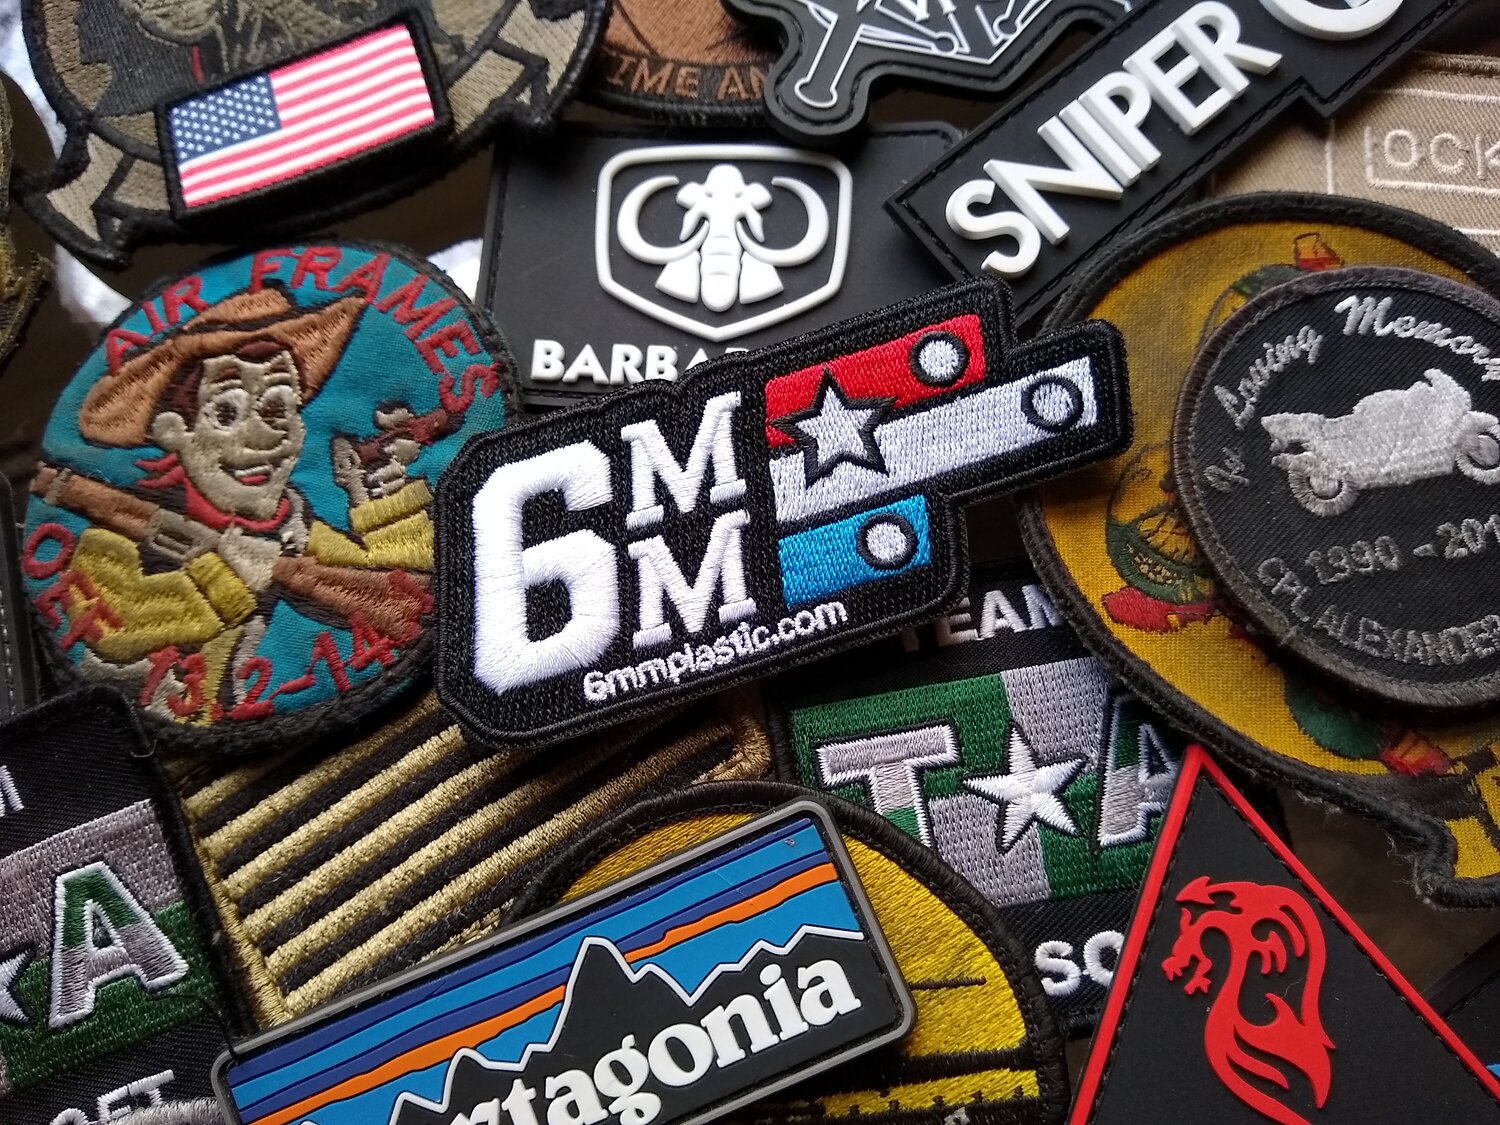 6 spare Velcro patches